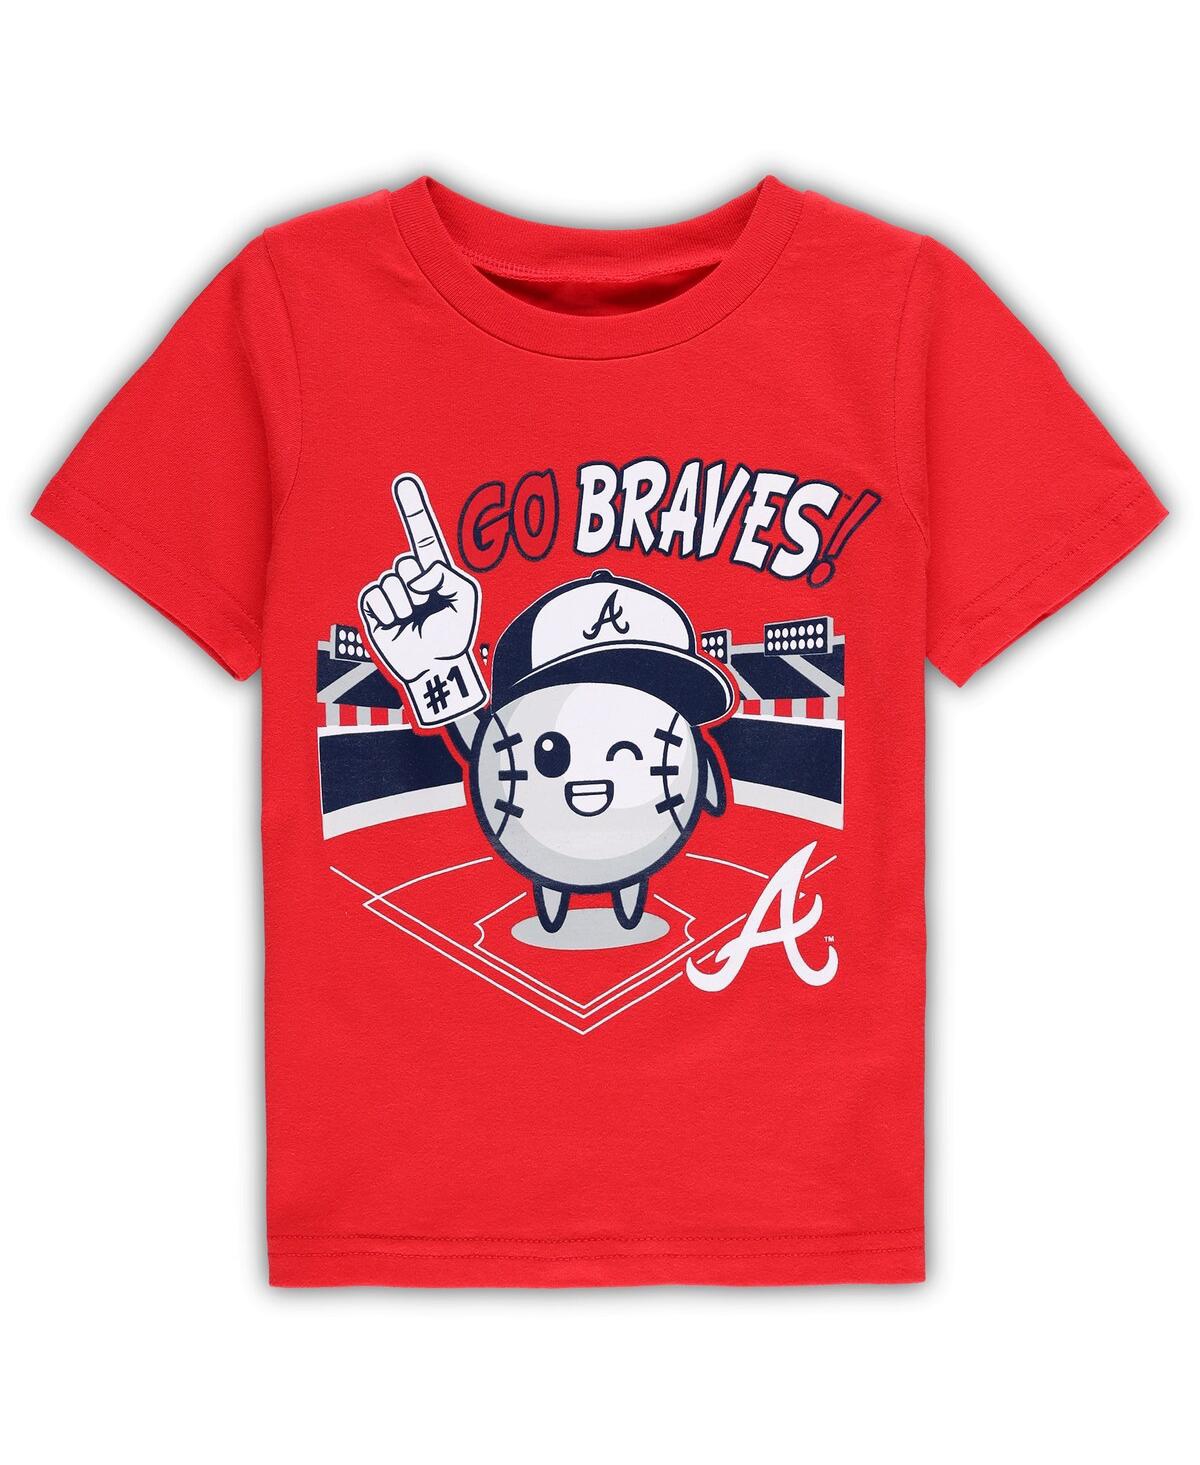 OUTERSTUFF TODDLER BOYS AND GIRLS RED ATLANTA BRAVES BALL BOY T-SHIRT